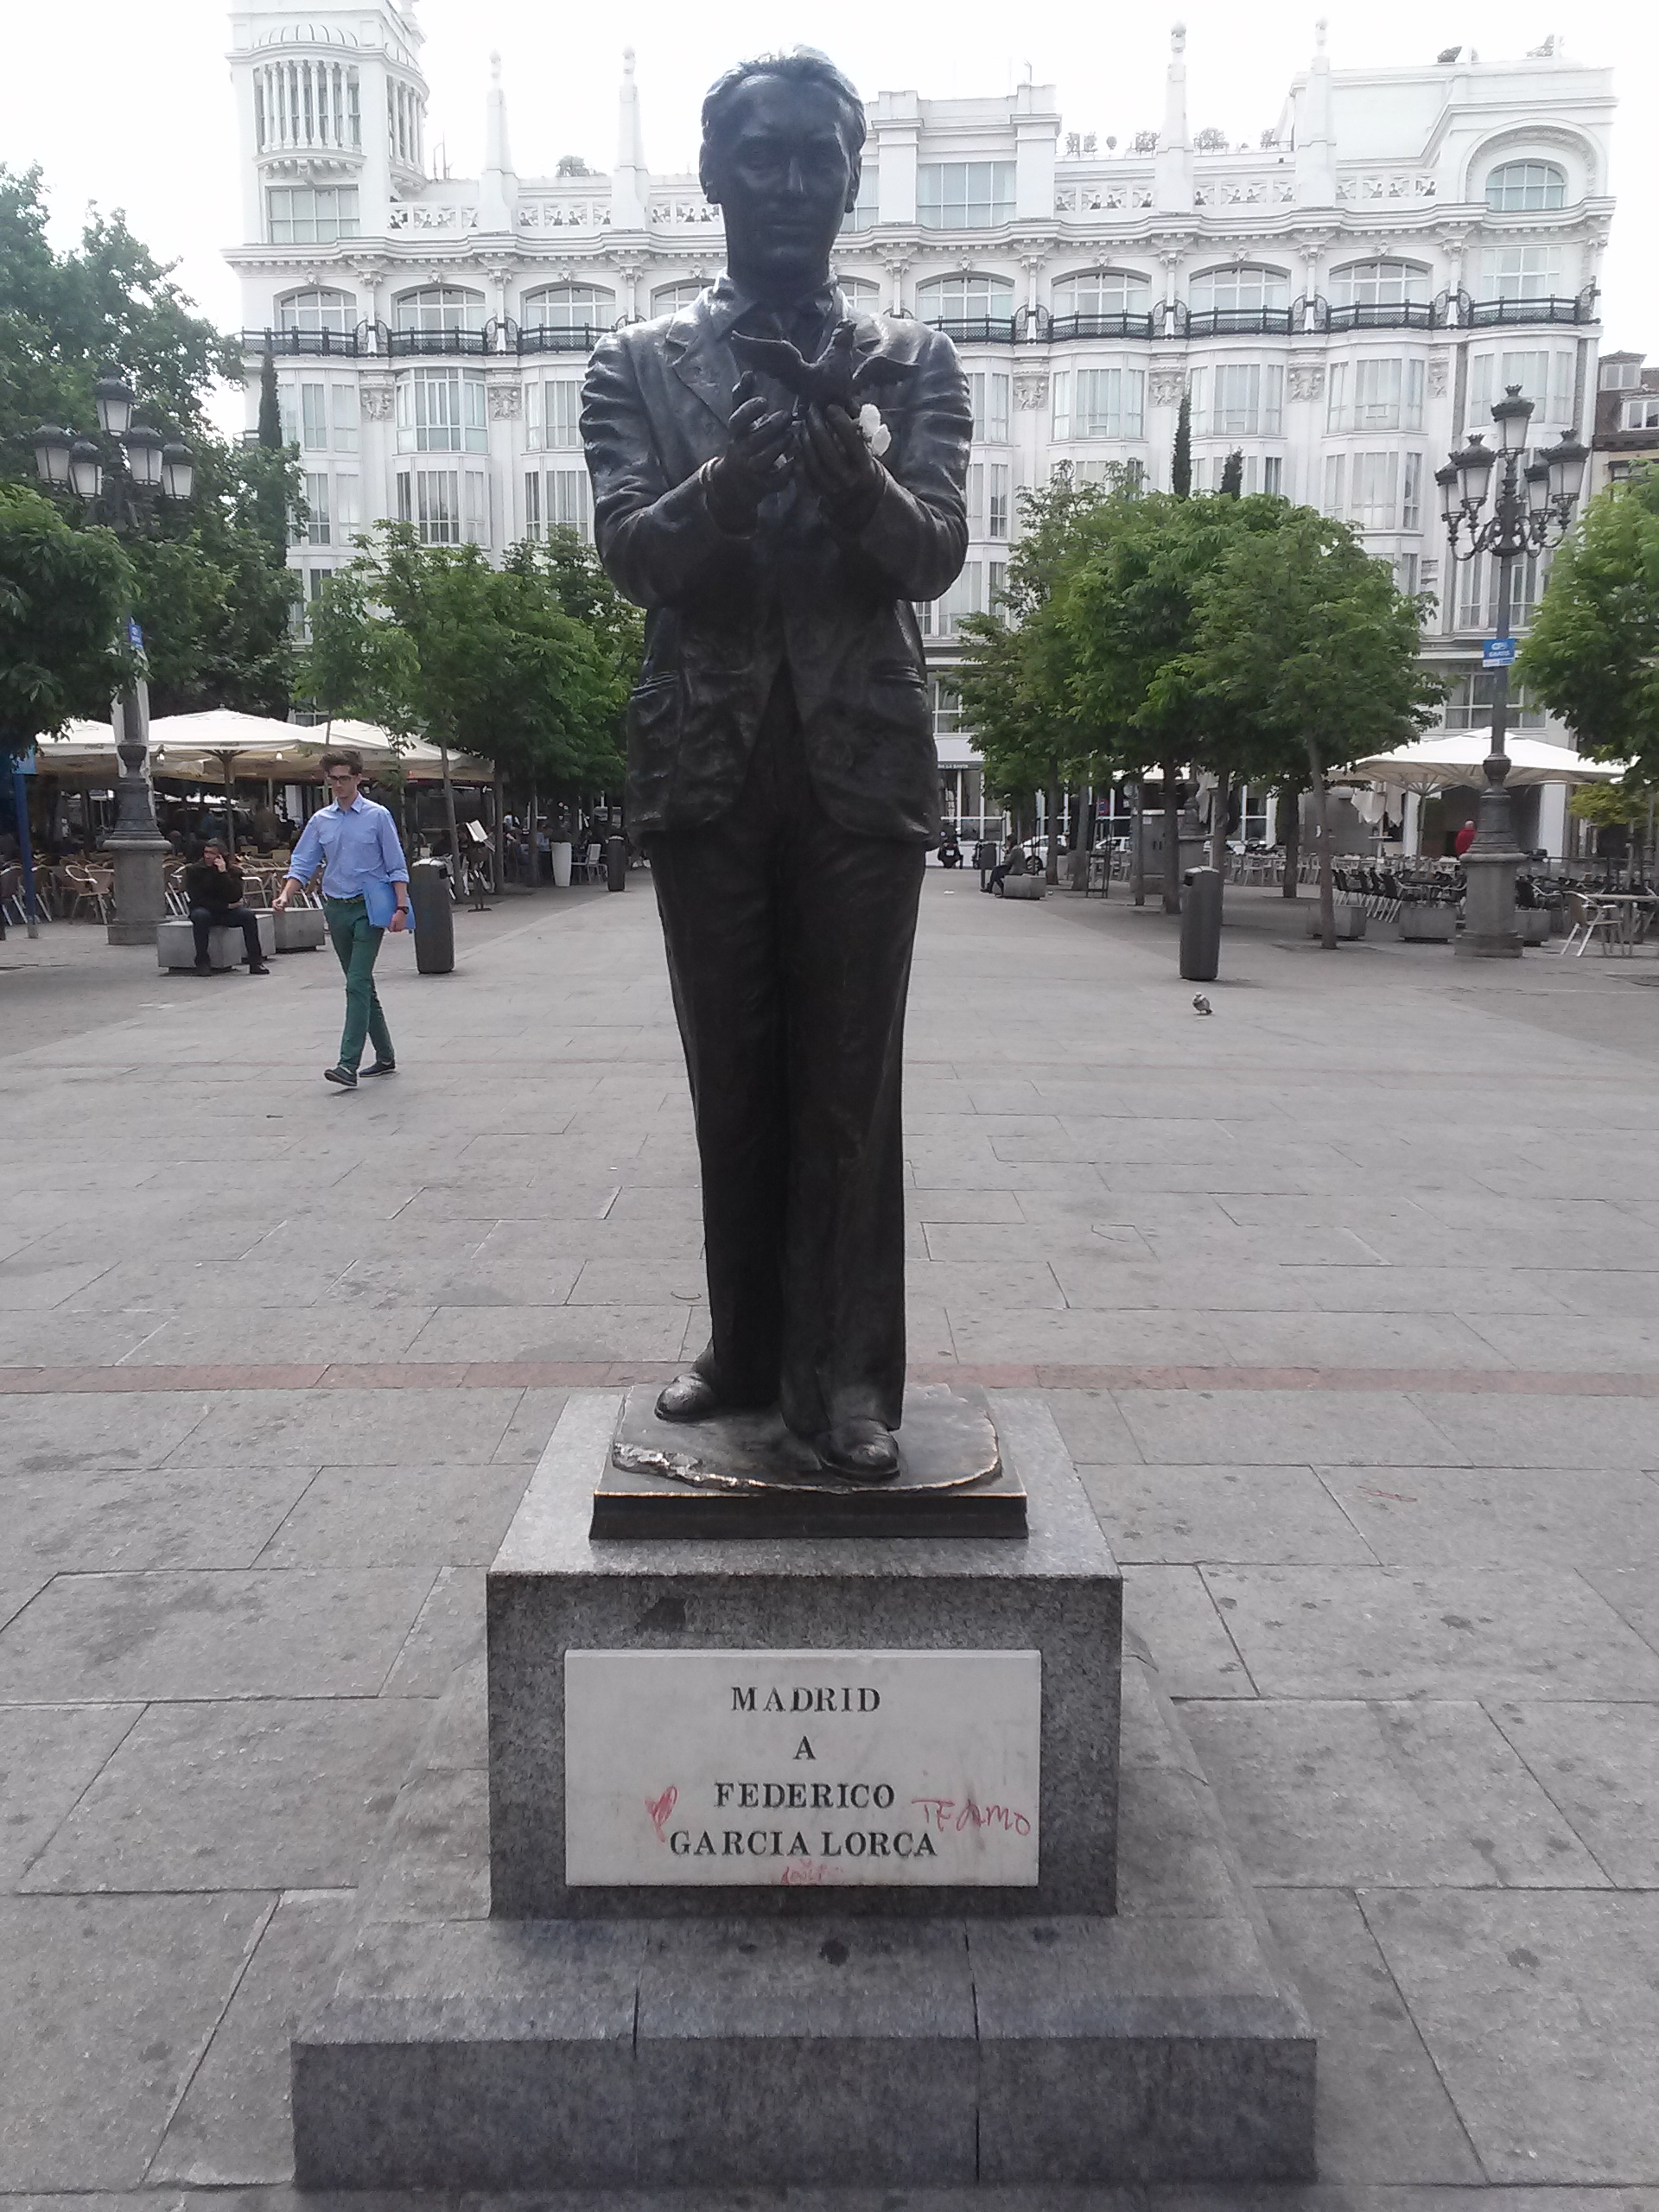 A photo of the statue of poet Federico Garcia Lorca in Plaza de Santa Ana, Madrid. The statue depicts Garcia Lorca holding a lark; visitors have placed flowers in his hands.